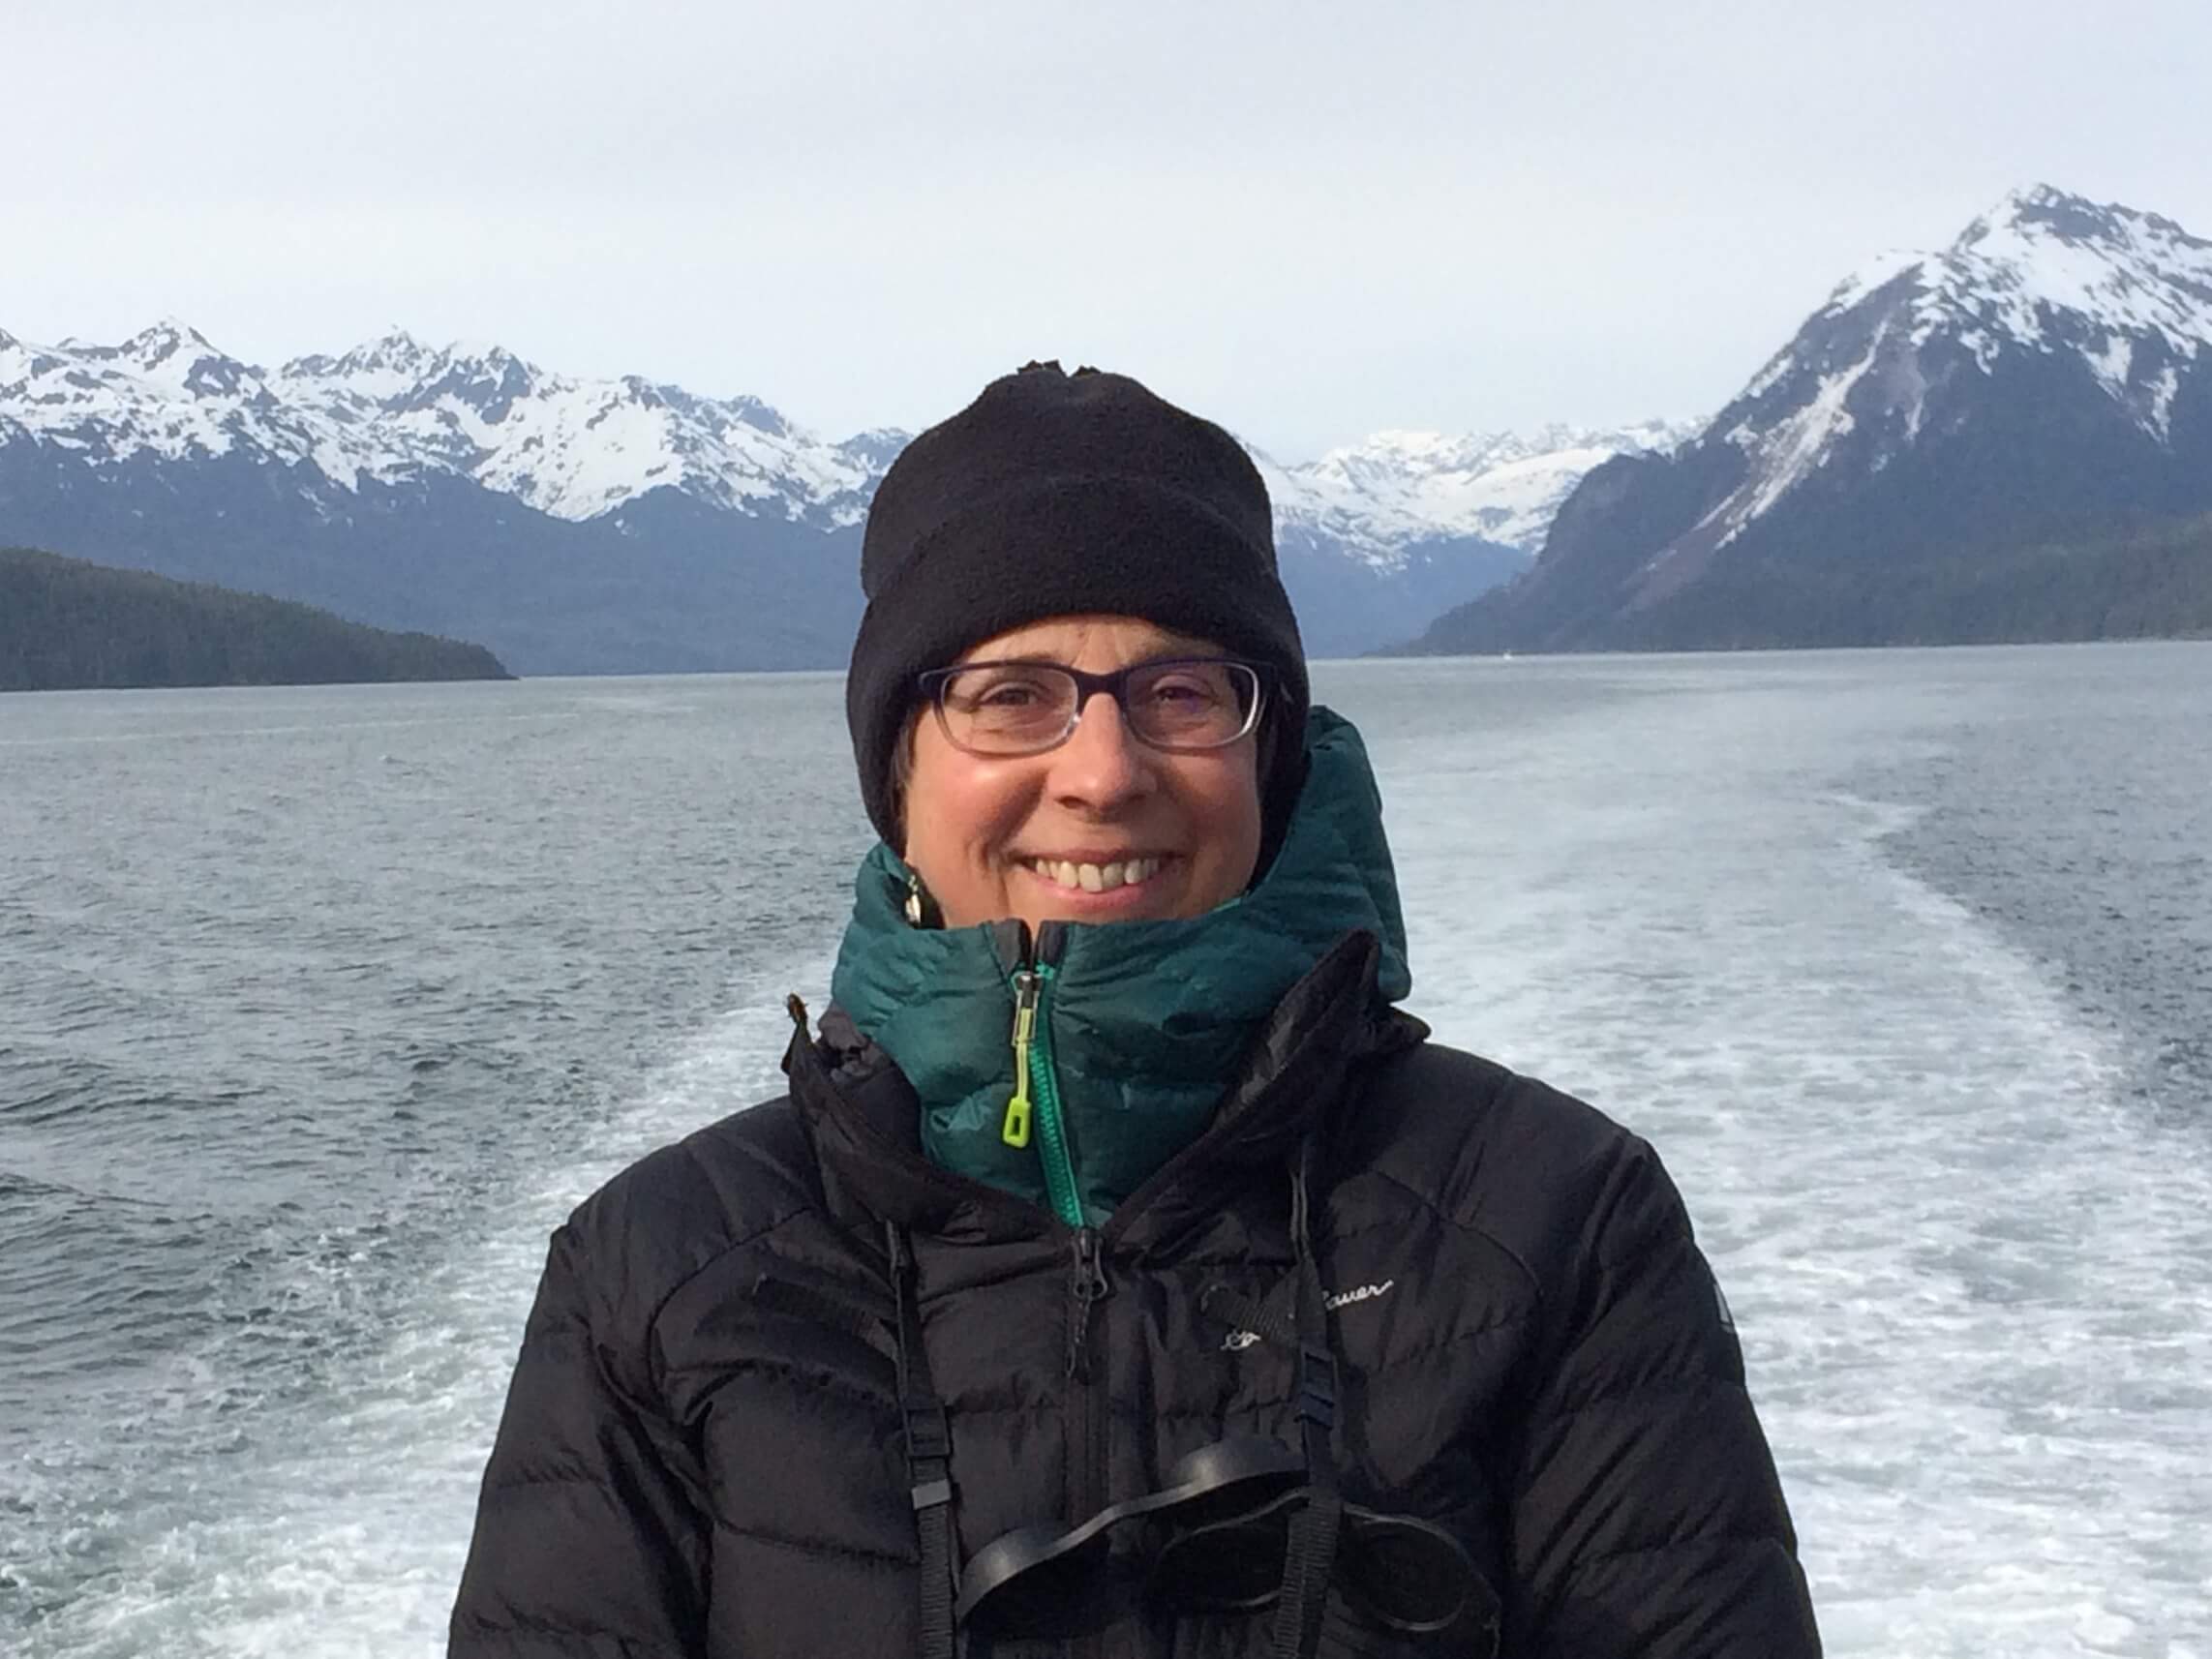 Retired Salvage Manager Marj Leone on vacation in Alaska